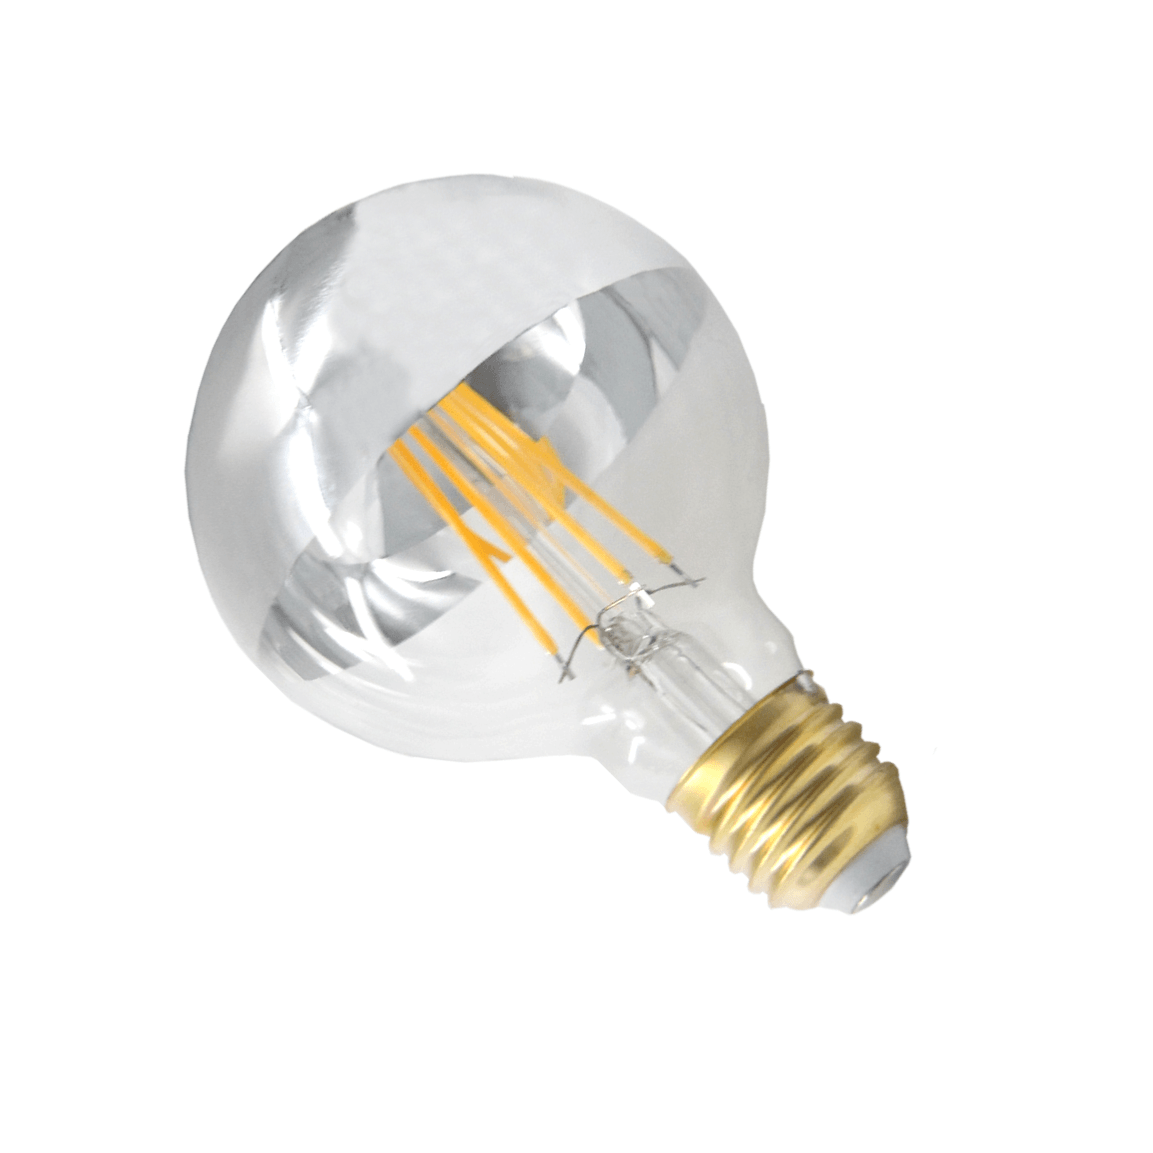 Ampoule LED E27 Filament Dimmable 8W G95 Globe Reflect Argent - Silamp France